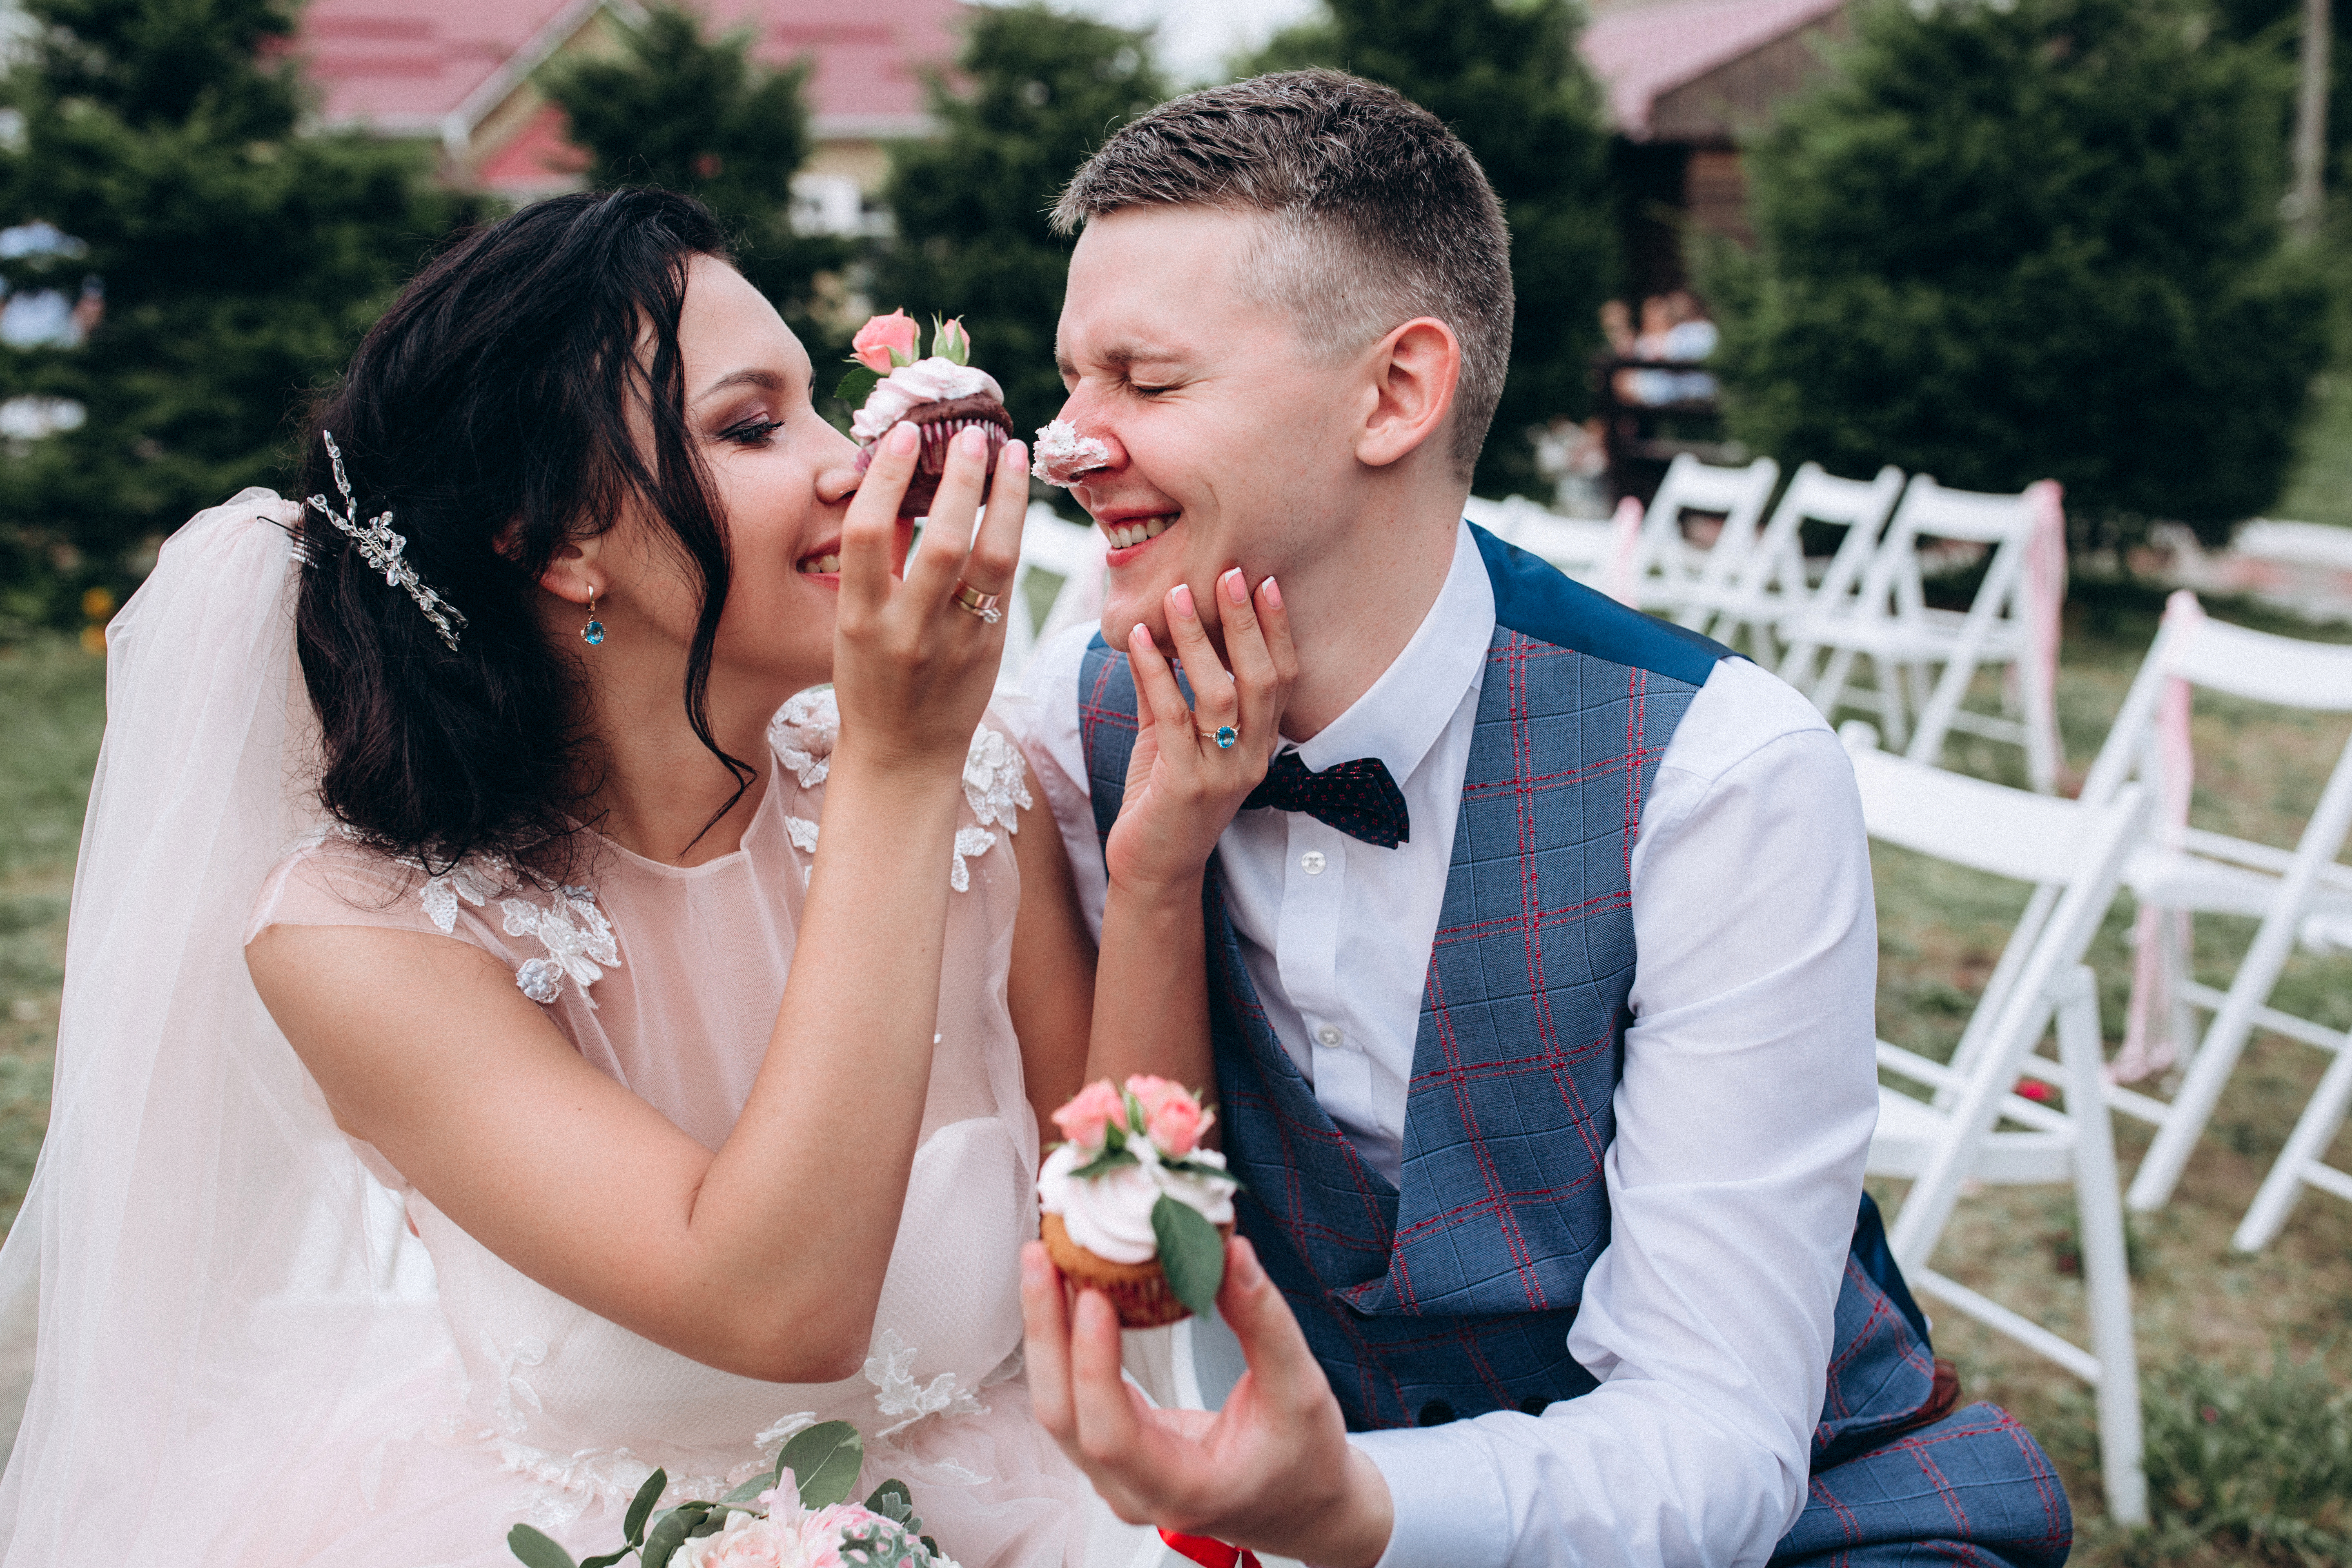 A bride and groom eating cupcakes | Source: Shutterstock